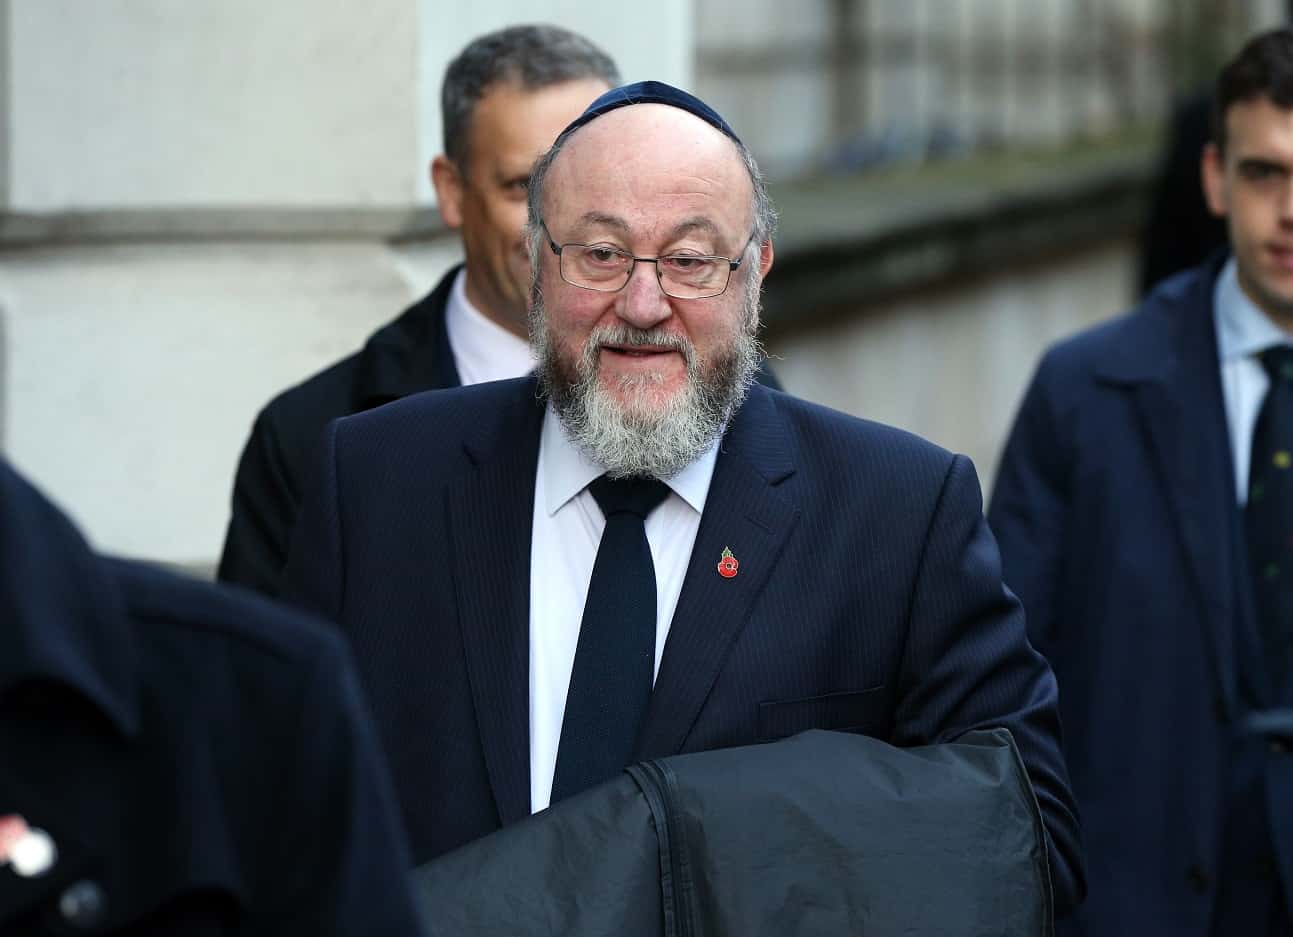 Chief Rabbi welcomes Starmer’s commitment to root out anti-Semitism